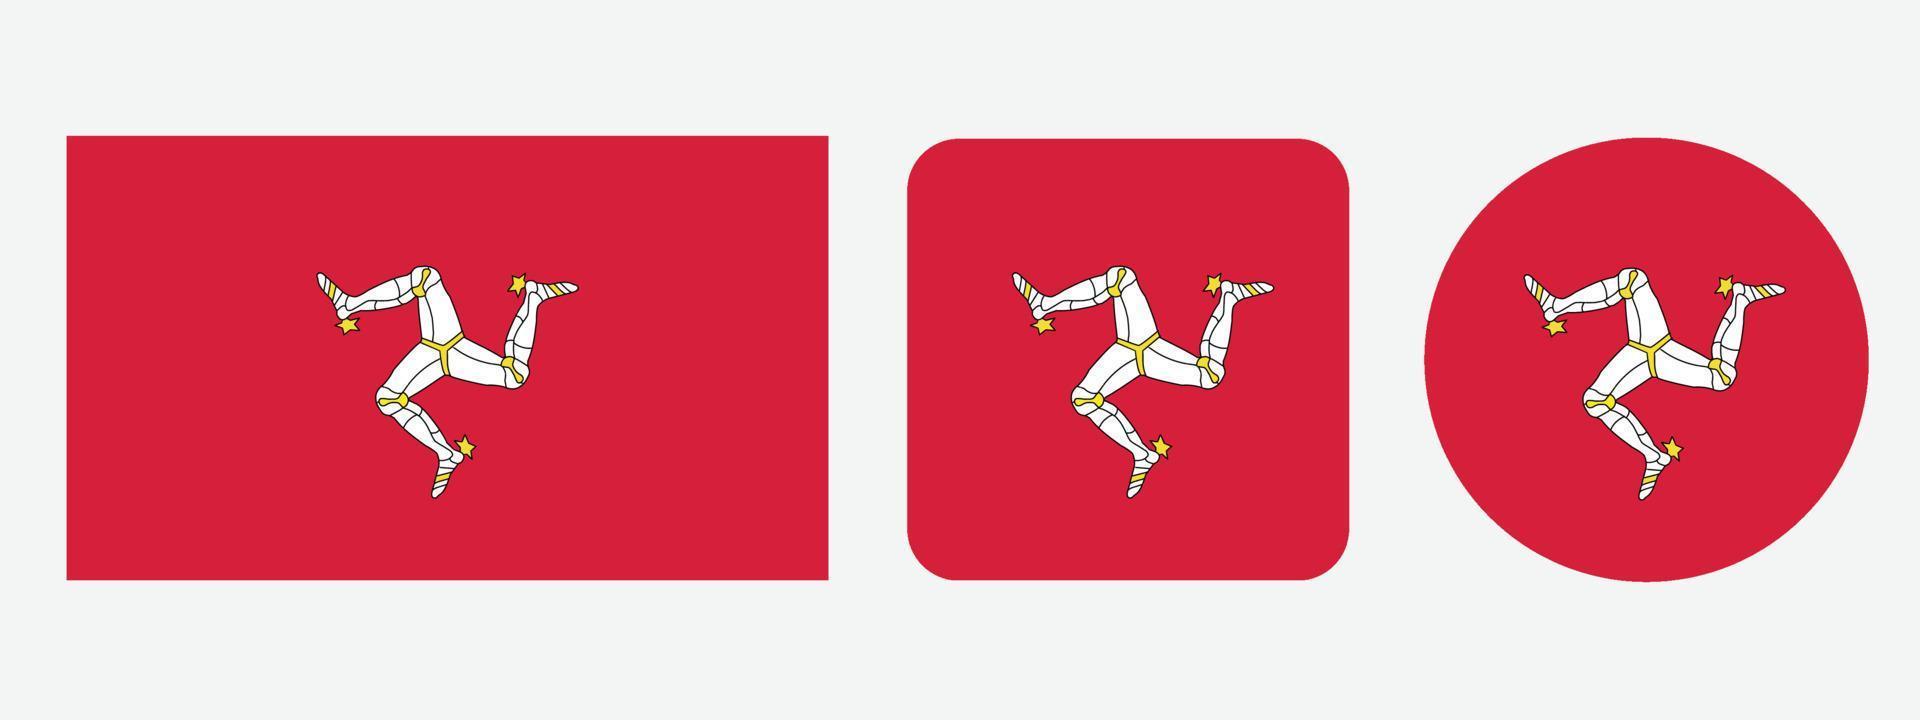 Isle of Man flag icon . web icon set . icons collection flat. Simple vector illustration.